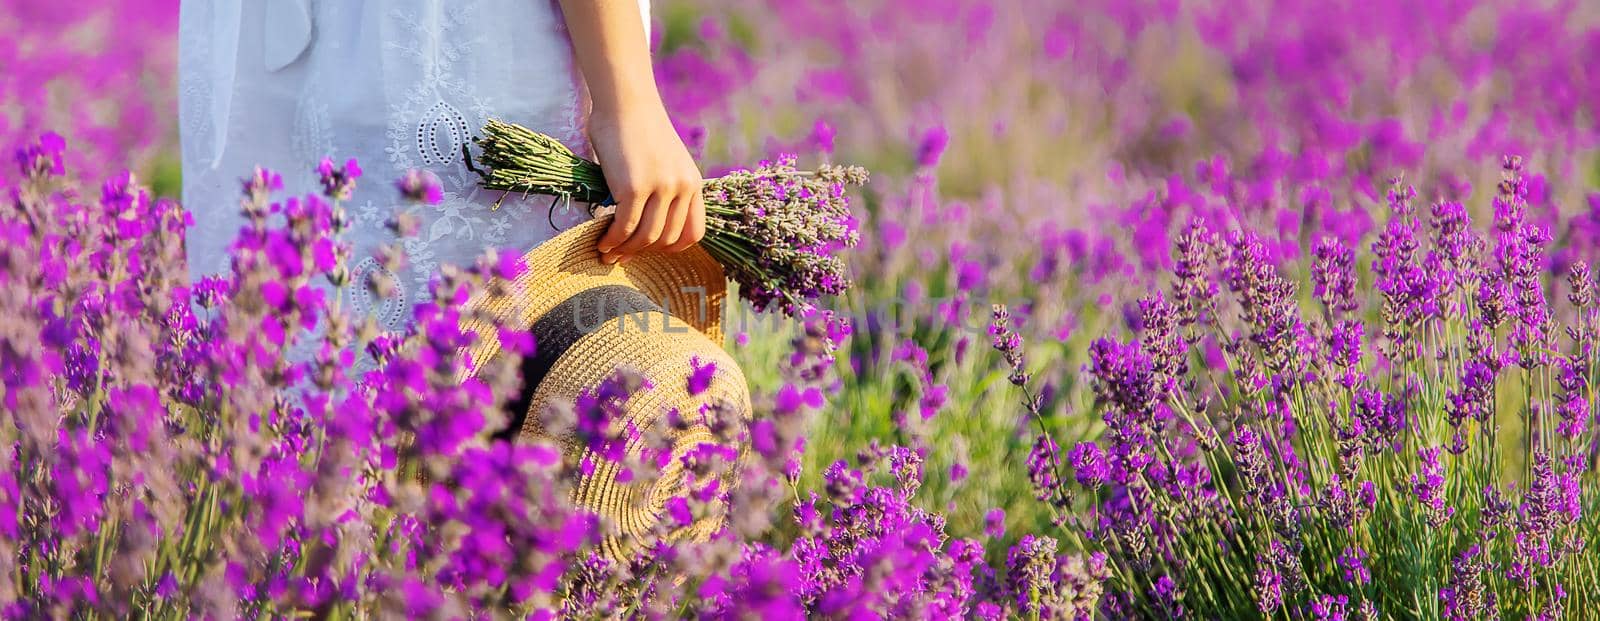 A child in a lavender field. Selective focus. Nature.